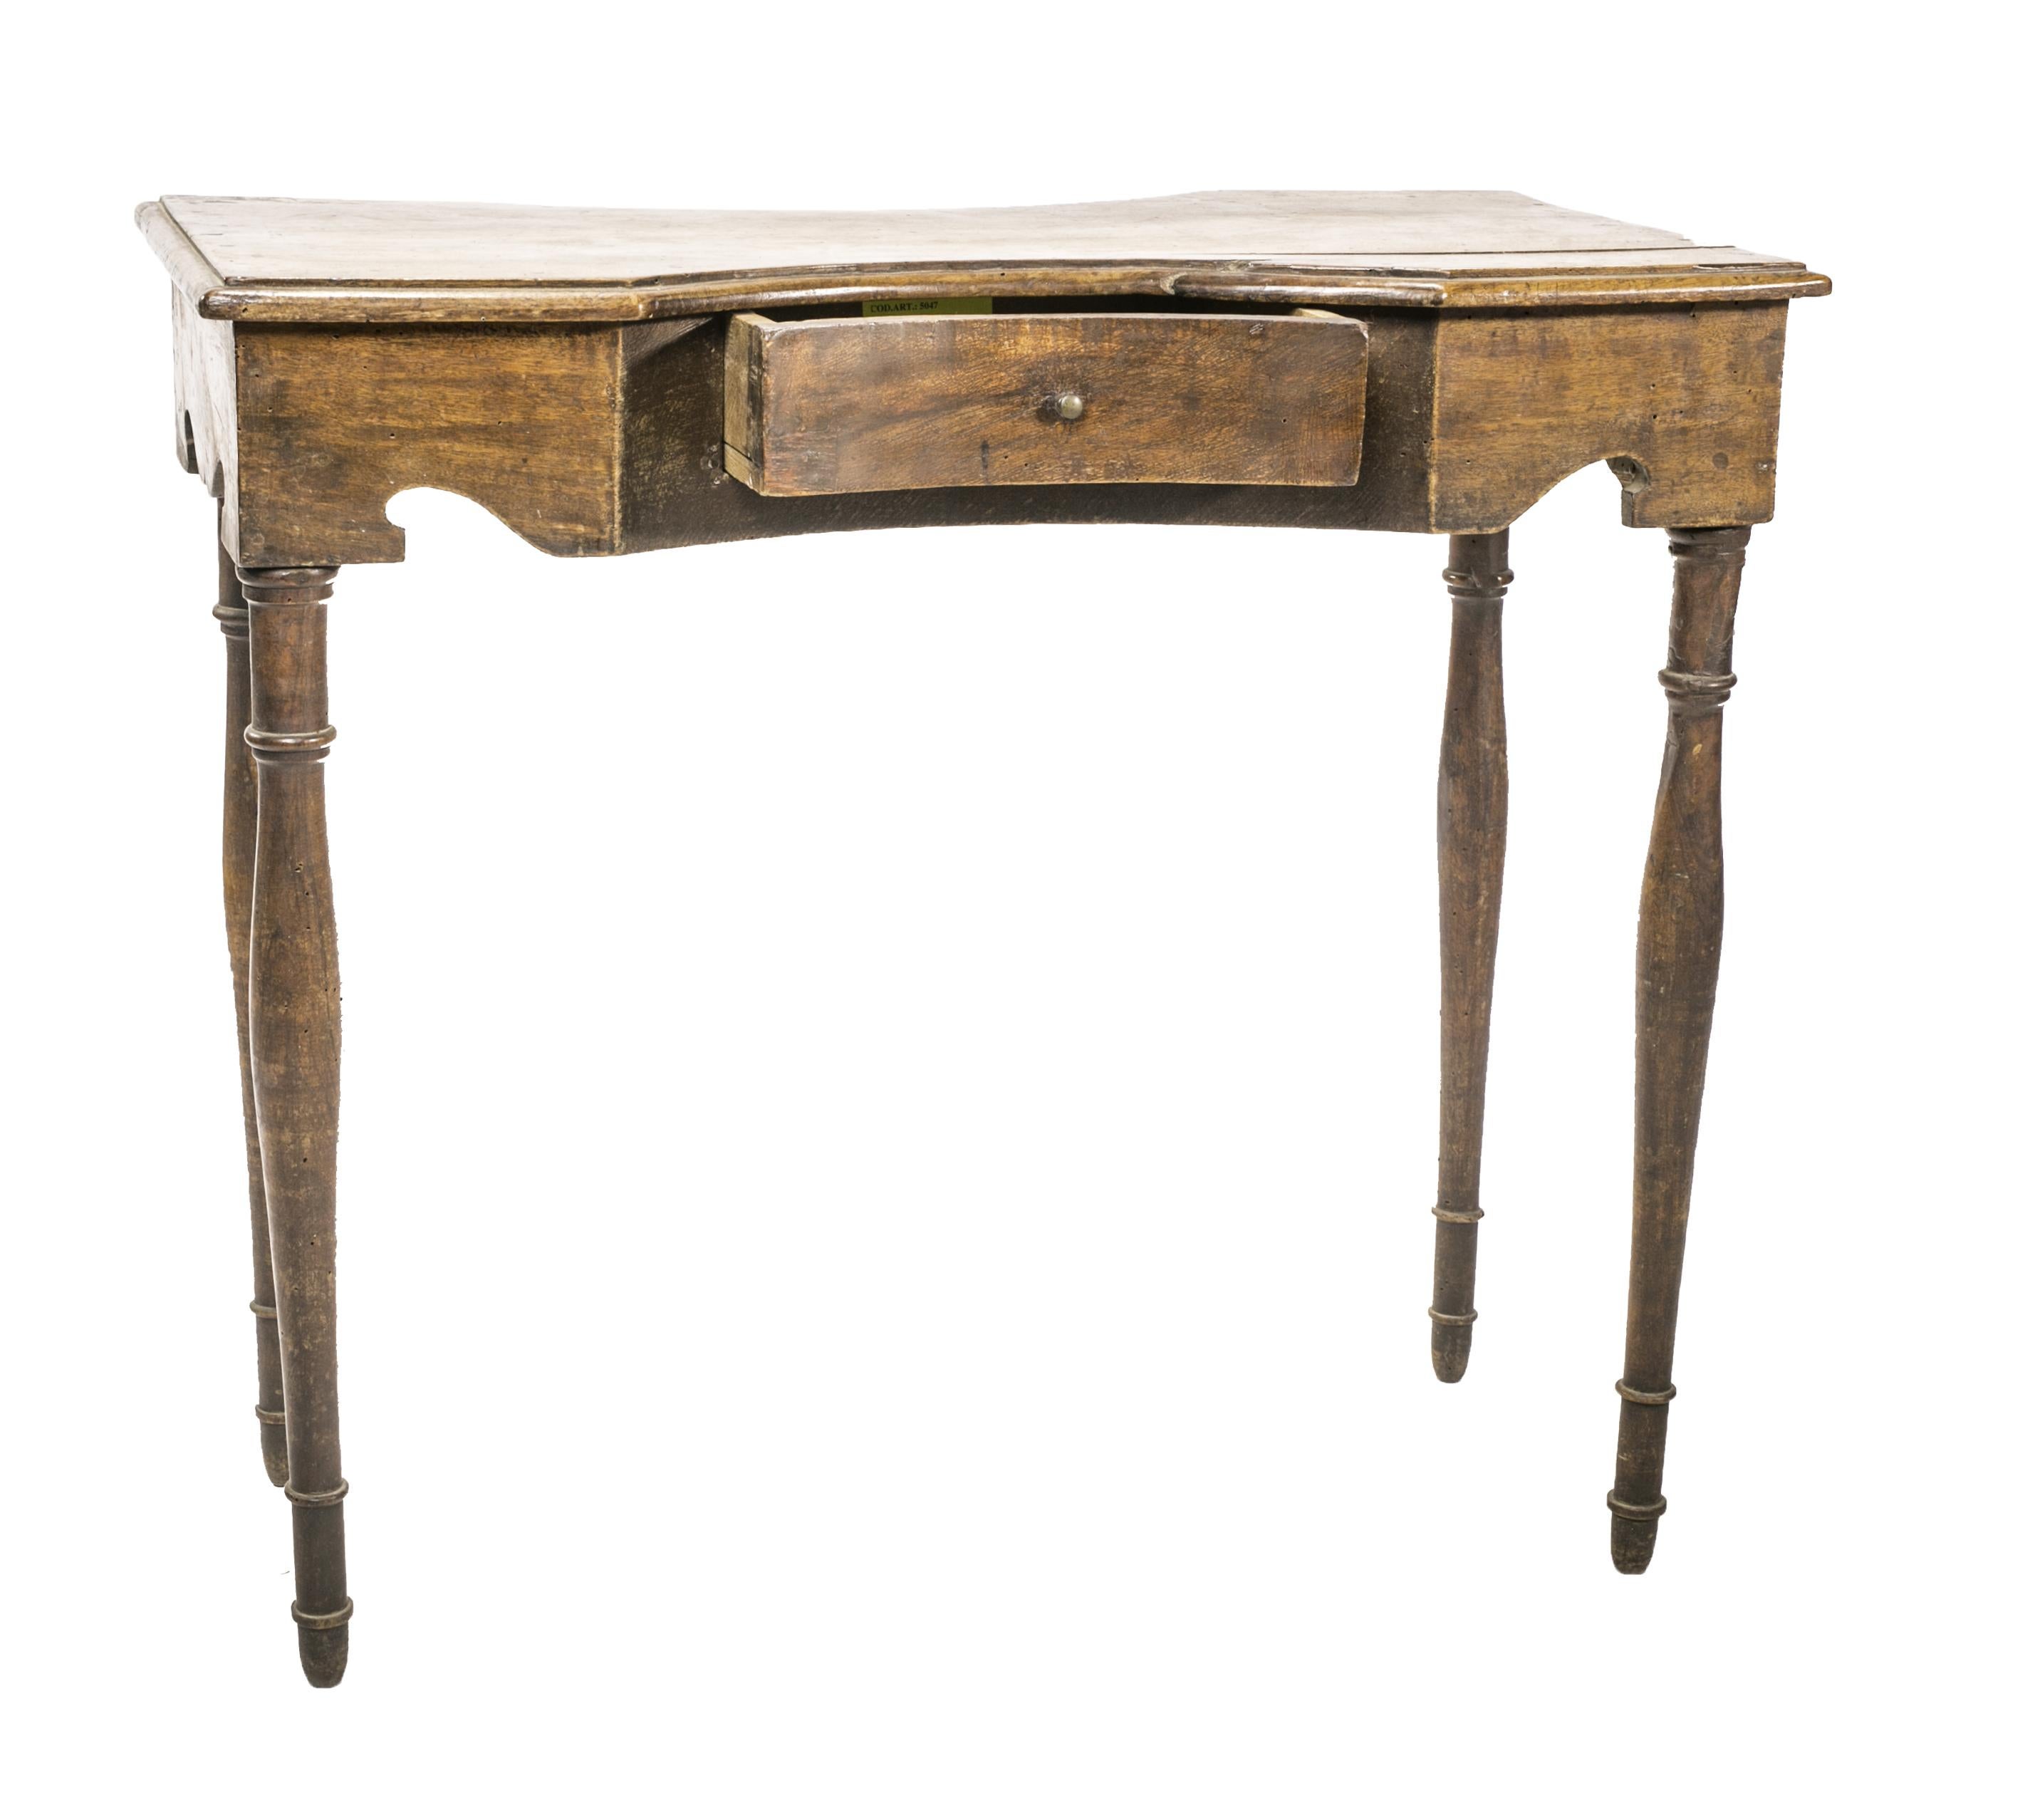 Engagement table.
For exchanging messages between lovers in the early 1800s.
The couple could exchange notes through the drawer that slides from one side to the other, where the two lovers' chairs were placed. 
A relative sat off to the side to